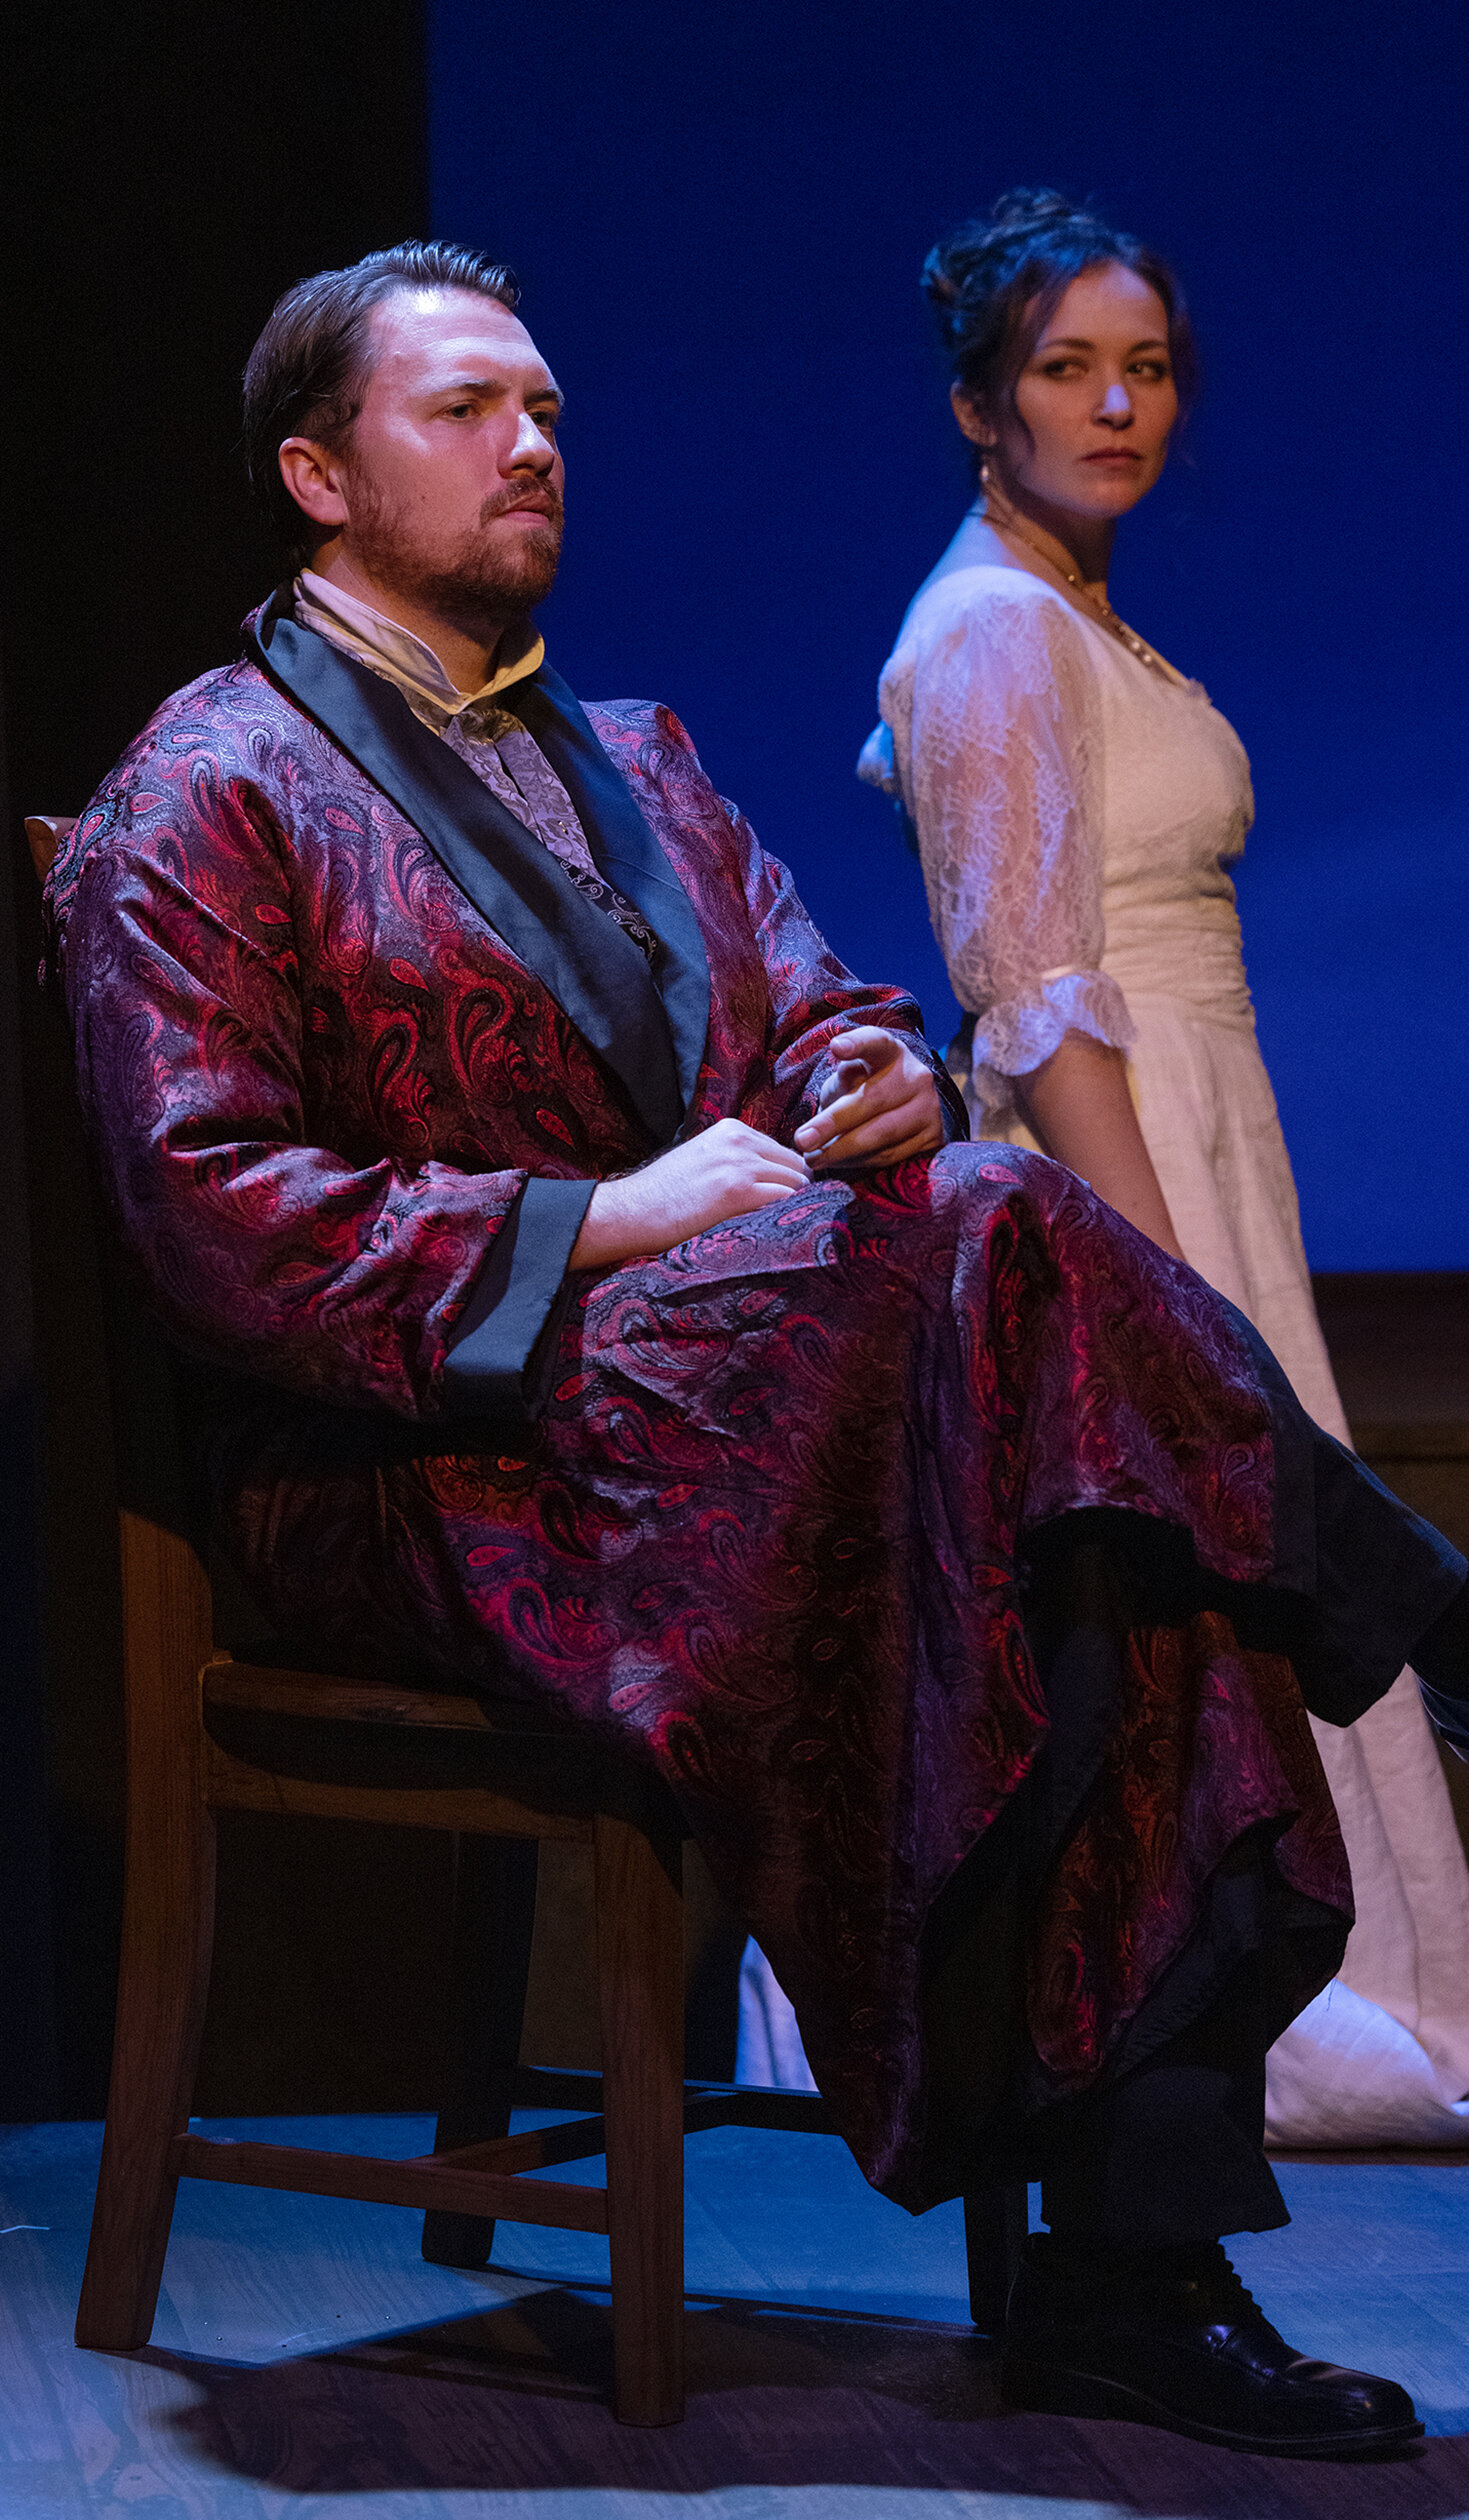 Aaron Shand as Leonce Pontellier and Bryn Booth as Edna Pontellier. Photo by Tim Fuller.